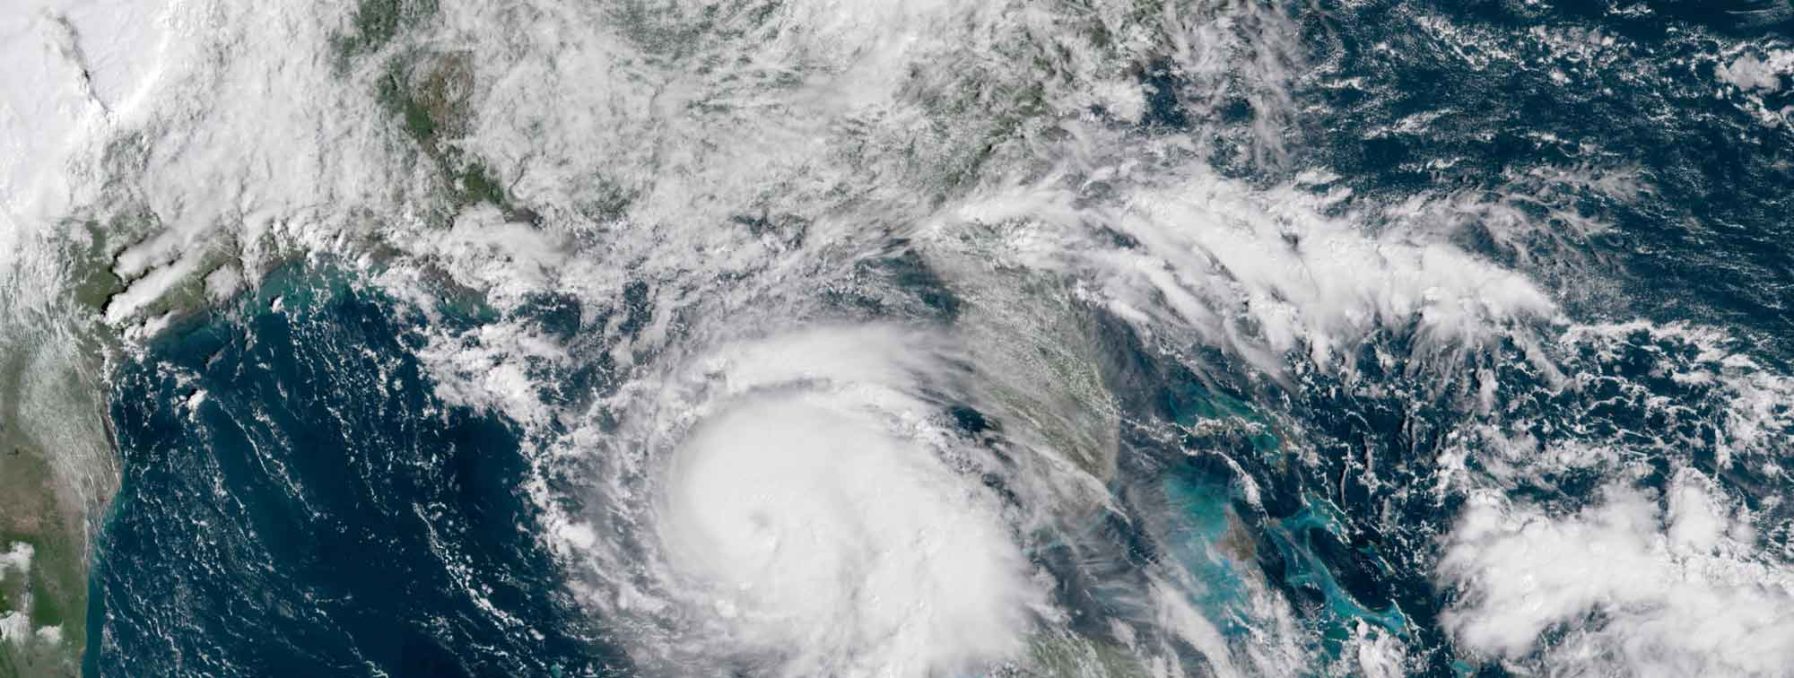 satellite image showing Hurricane Michael from space